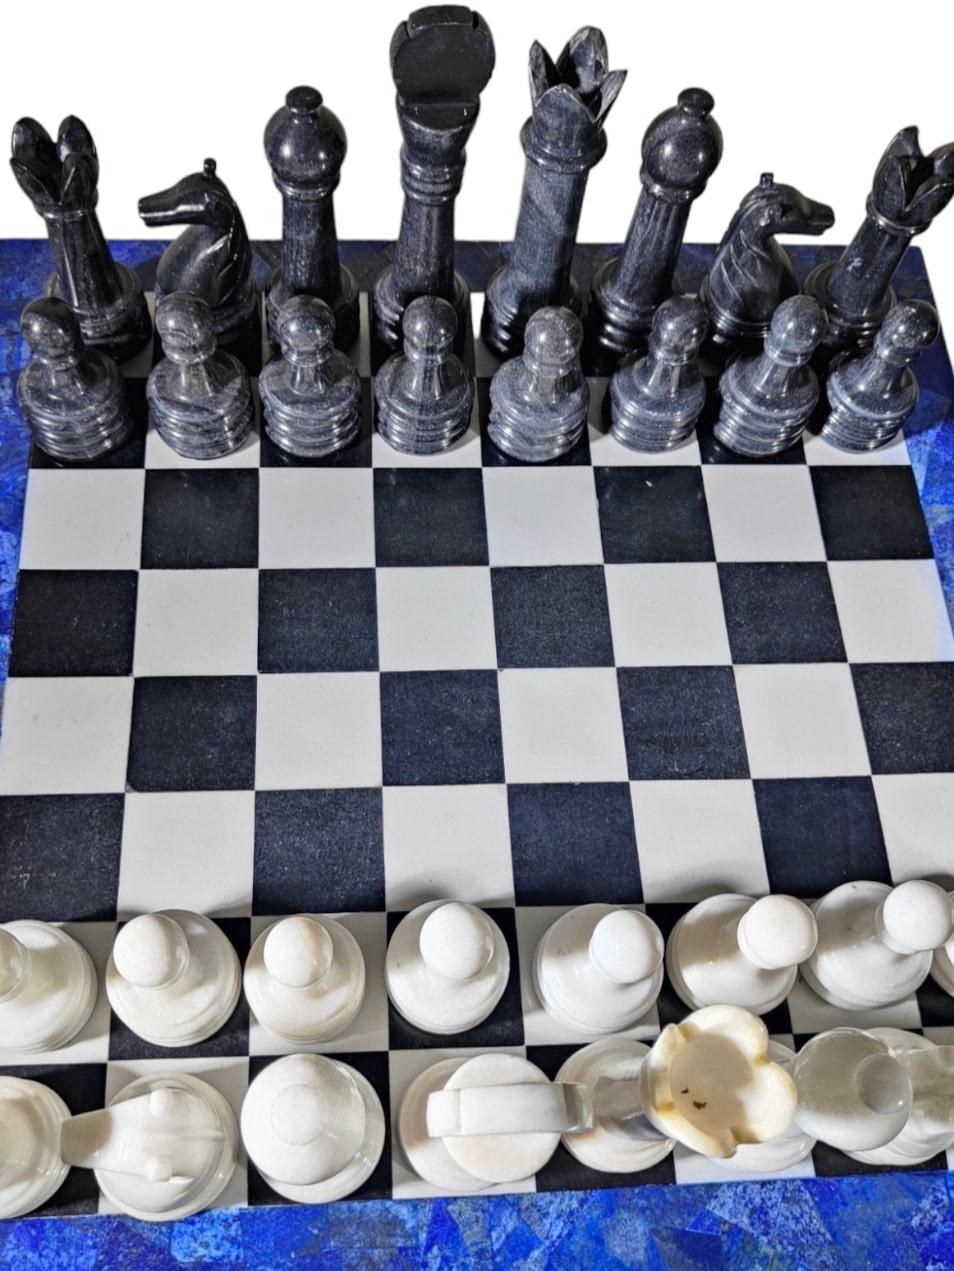 Italian Chess Table from the 1950s - Lapis Lazuli, Marble, and Dragon-Shaped  For Sale 6